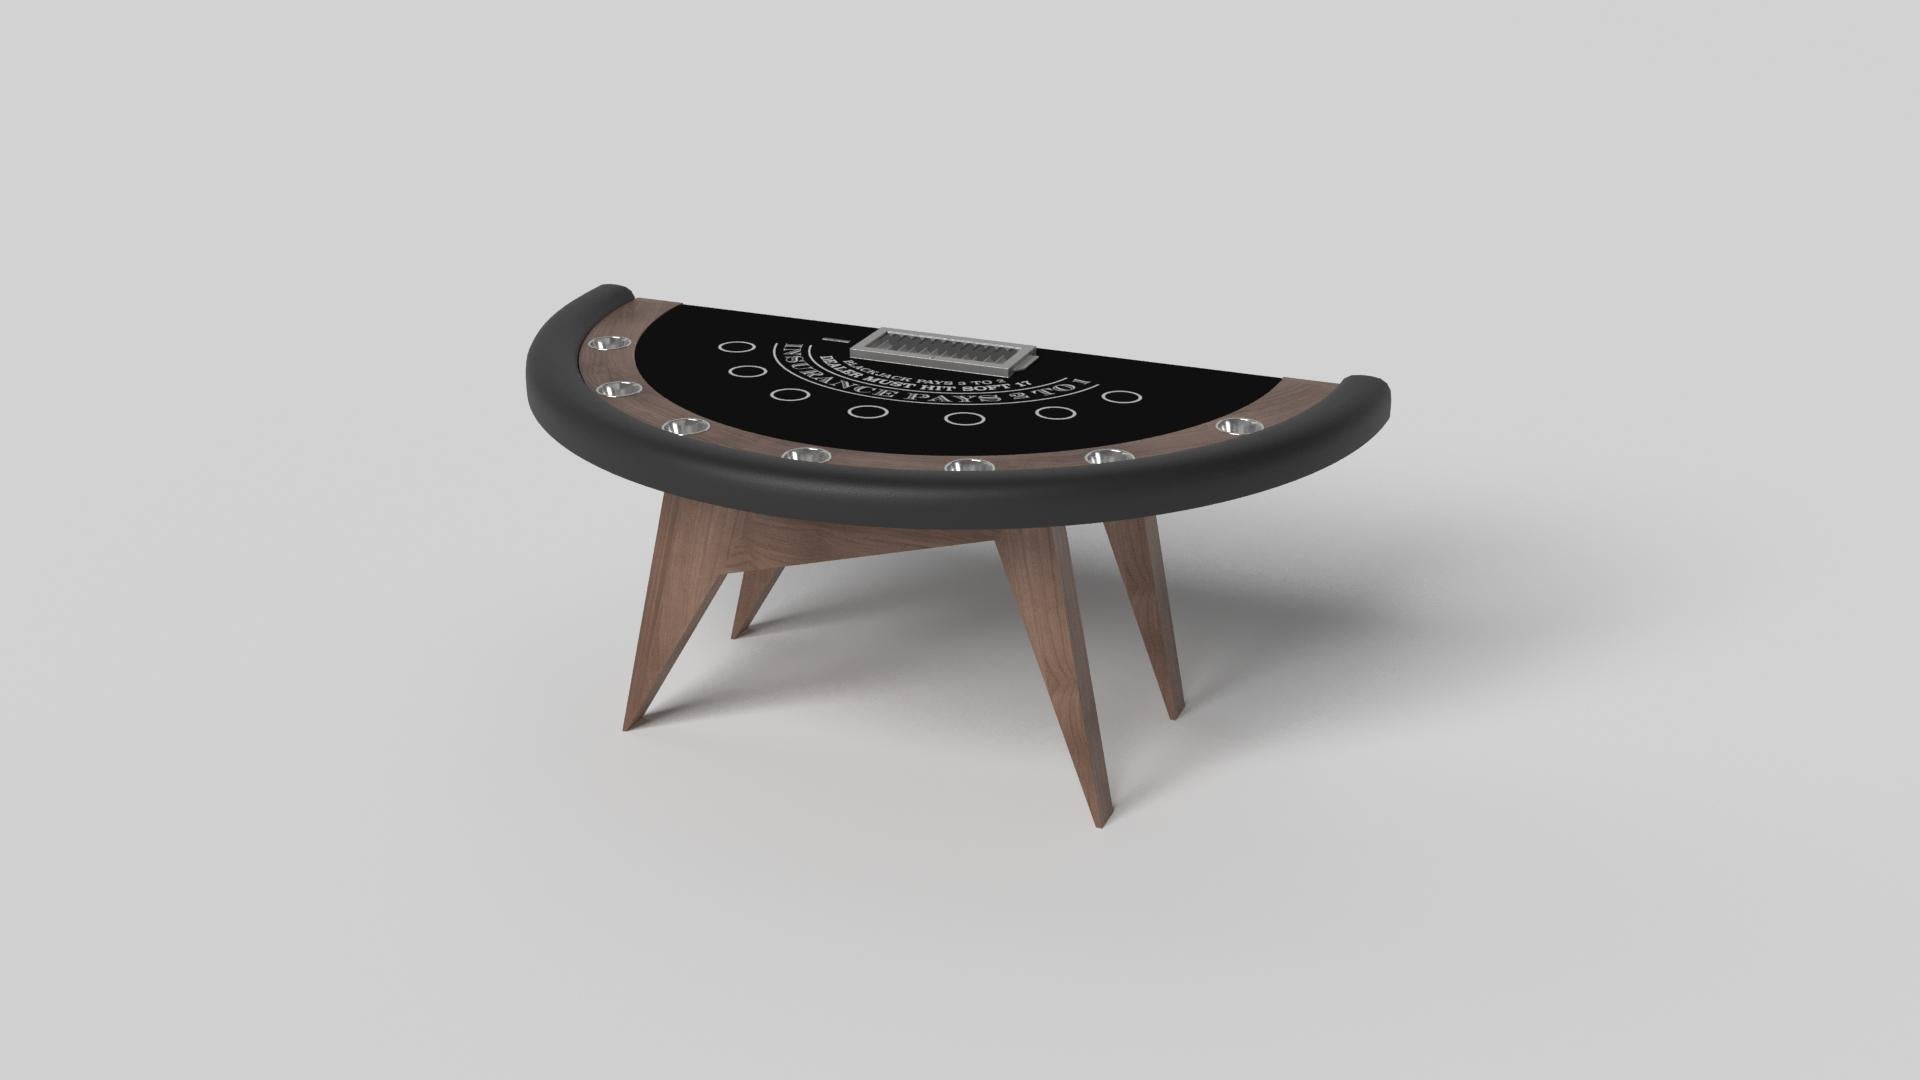 Simple yet sophisticated, the Mantis blackjack table puts a fresh, modern spin on a classic four-legged design. Sharp angles and tapered legs provide sleek stability.

Size:

88”X46”X30” (Dining Height)
Custom Sizes Available Per Request